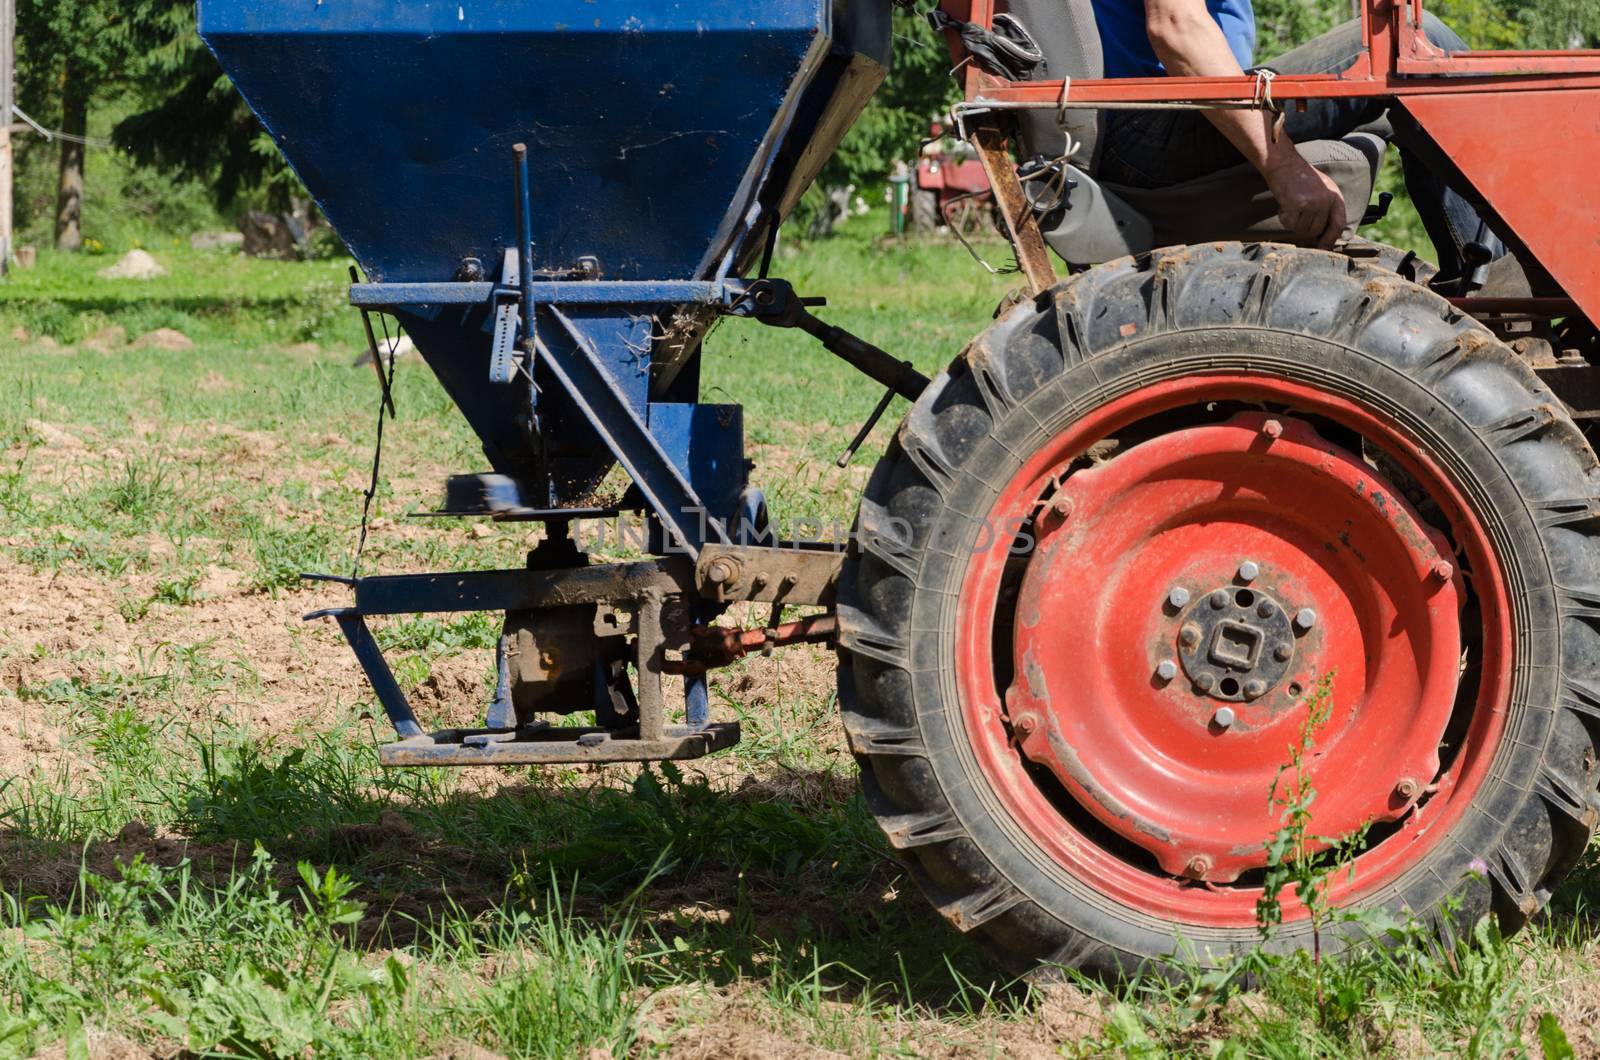 Follow retro tractor wheels and seeder equipment sow buckwheat seeds in agriculture field.